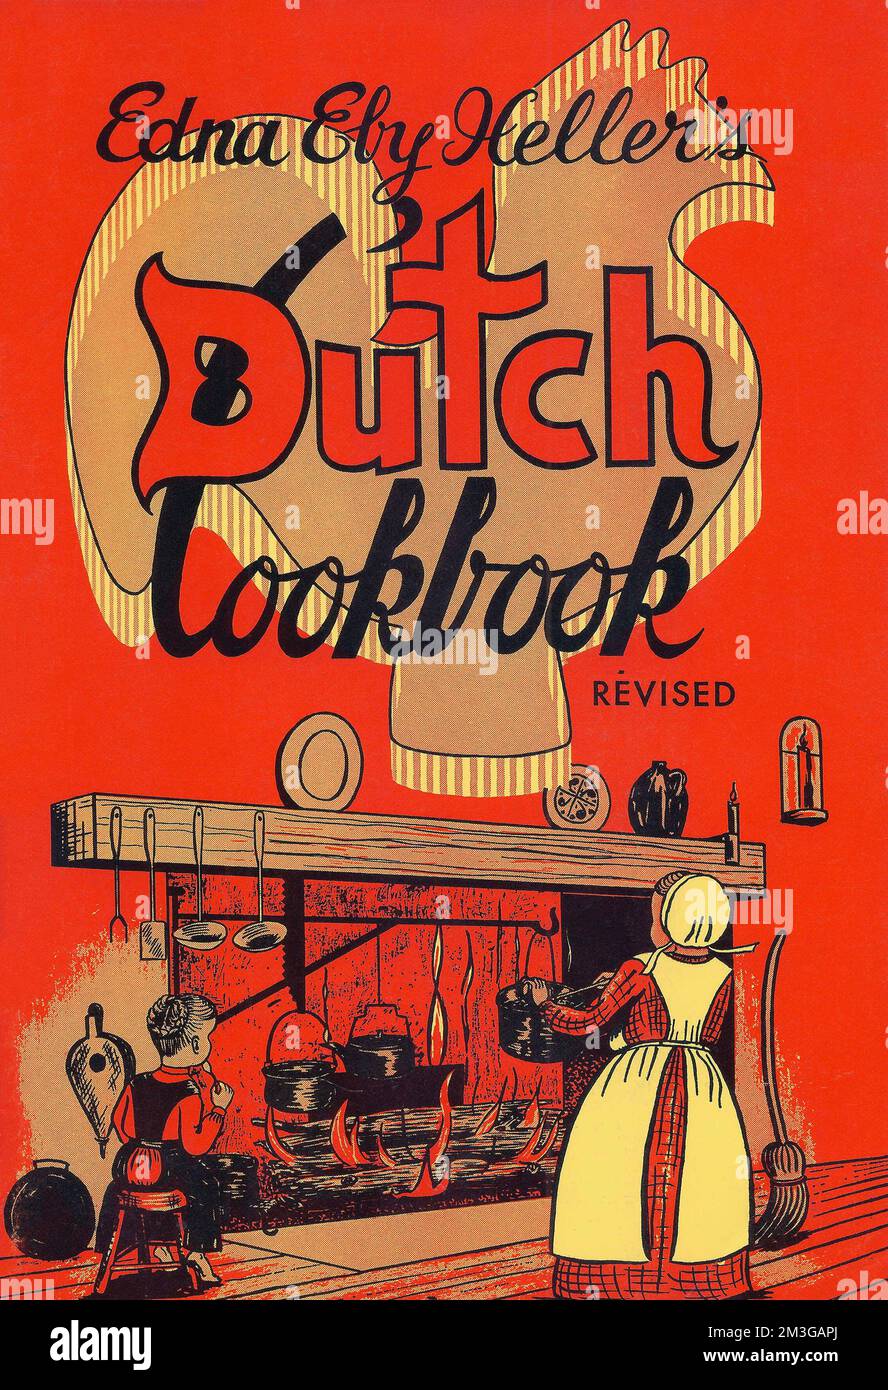 The cover of this 1974 cookbook features Amish girls cooking on an open hearth that is, in reality, a faux hearth in the museum of the Historical Society of Berks County, Pa. Stock Photo